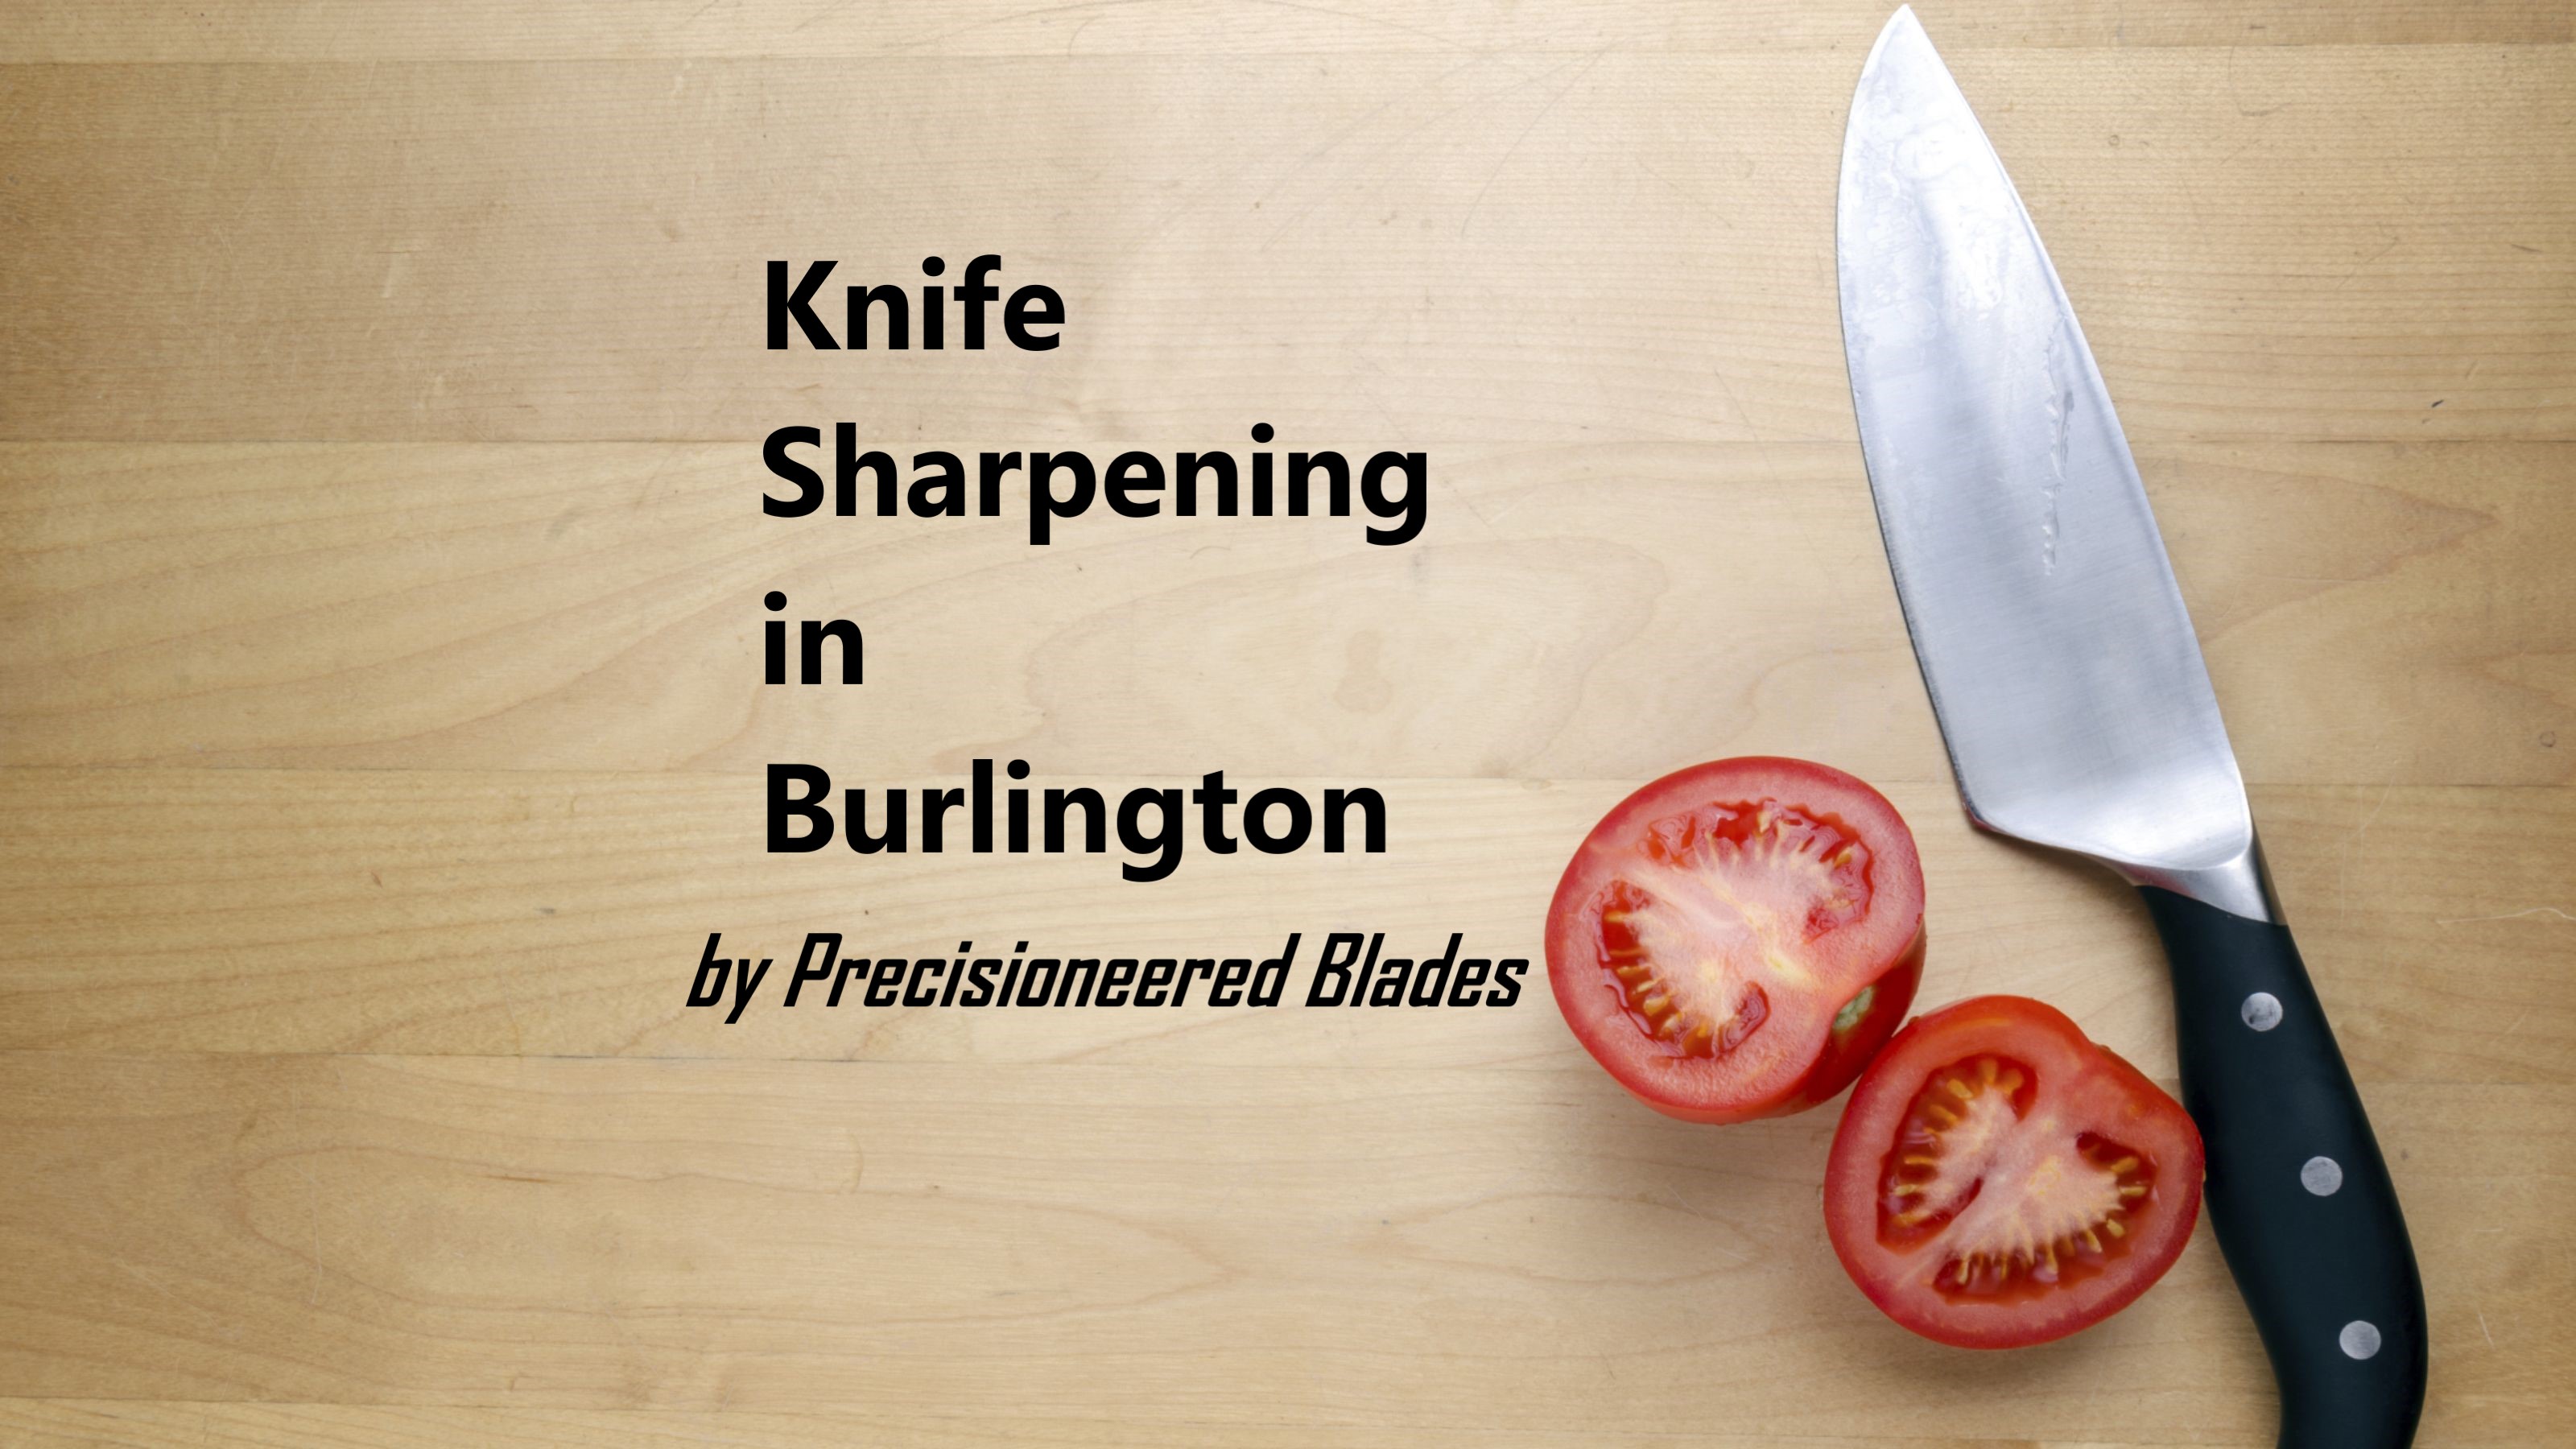 Knife Sharpening by Precisioneered Blades